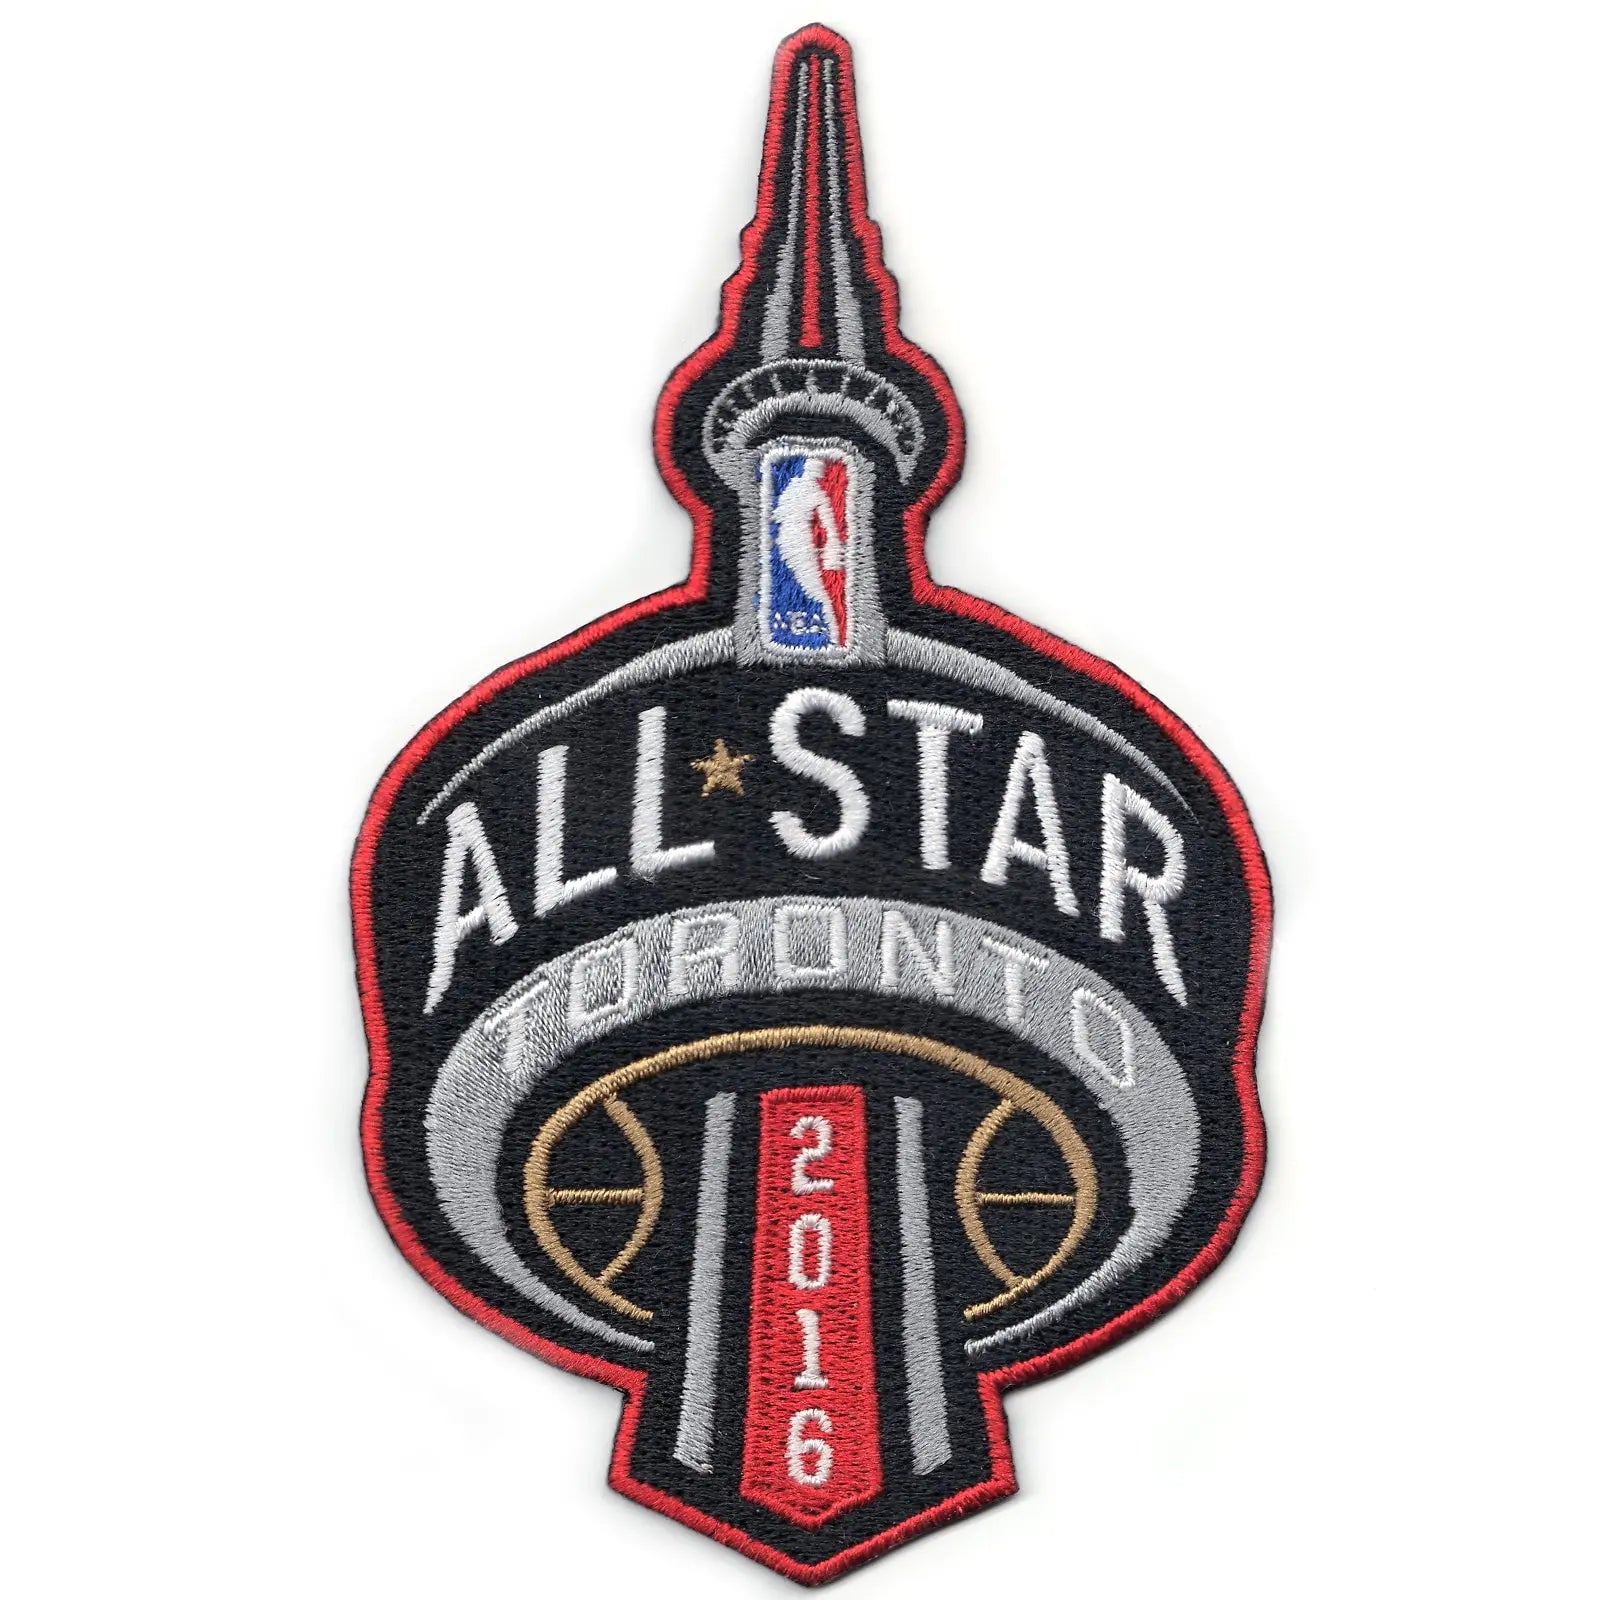 2016 NBA All Star Game Patch in Toronto Raptors Canada Large Patch 